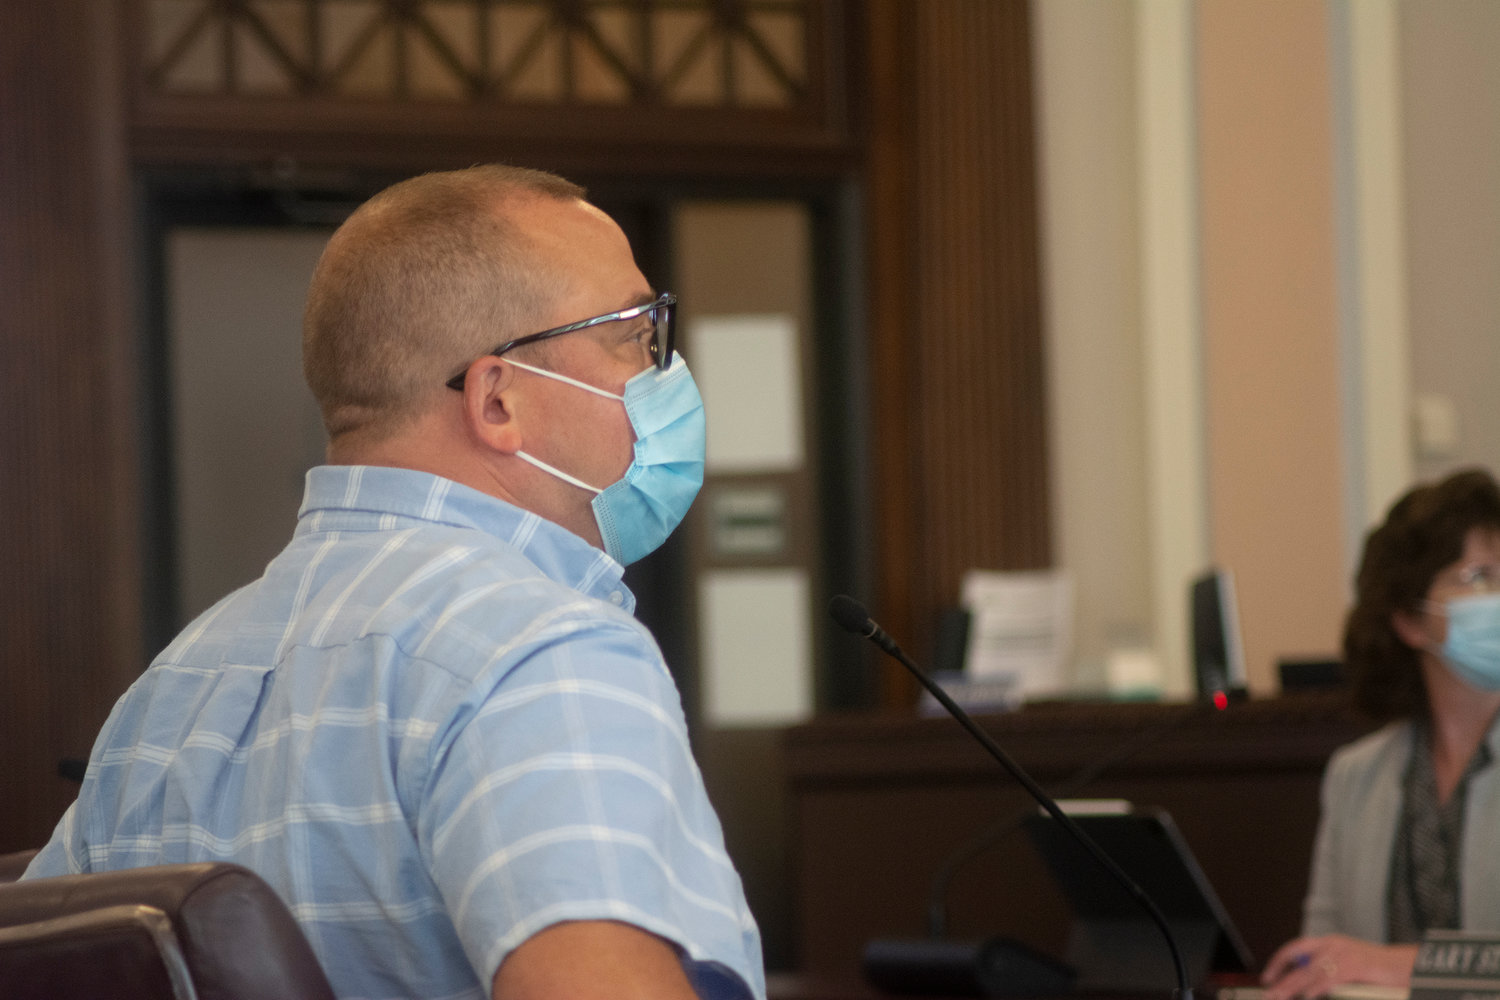 Public Health Director JP Anderson wore a mask Wednesday as he announced the county's health officials recommend even fully-vaccinated residents don face coverings in the midst of surging delta variant COVID-19 cases.